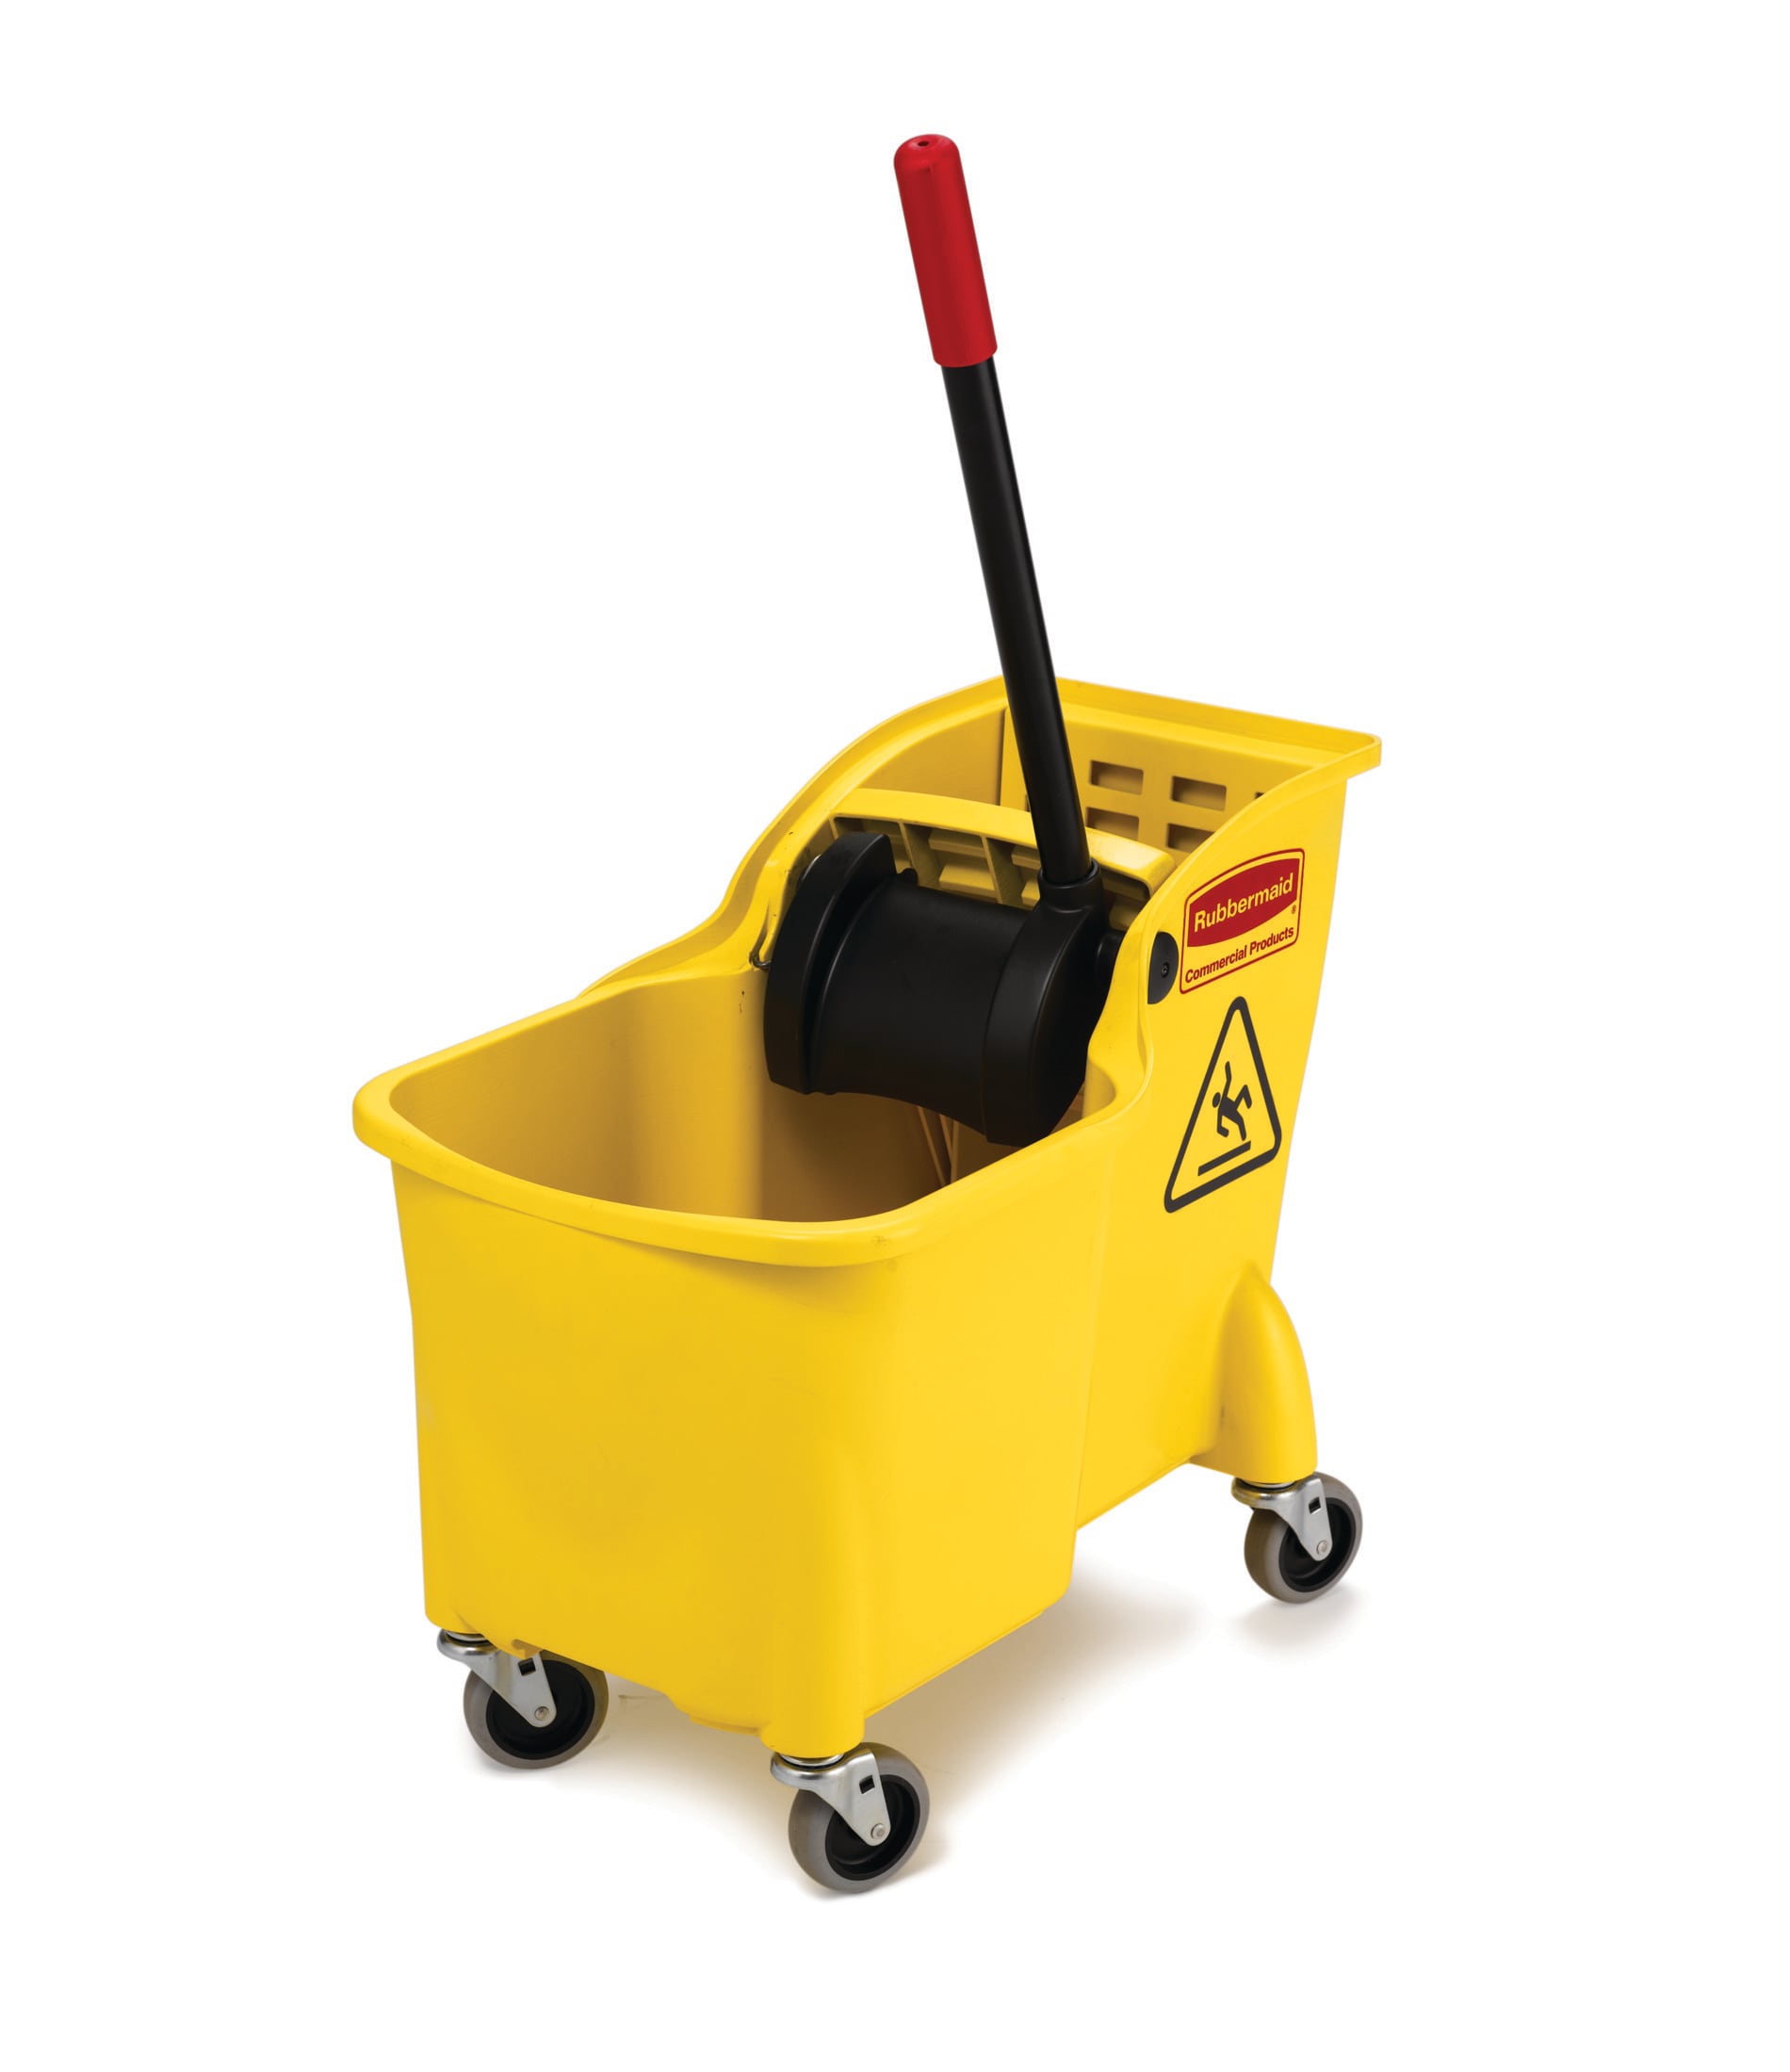 Simpli-Magic 79139 Commercial Mop Bucket with Side Press Wringer Industrial 